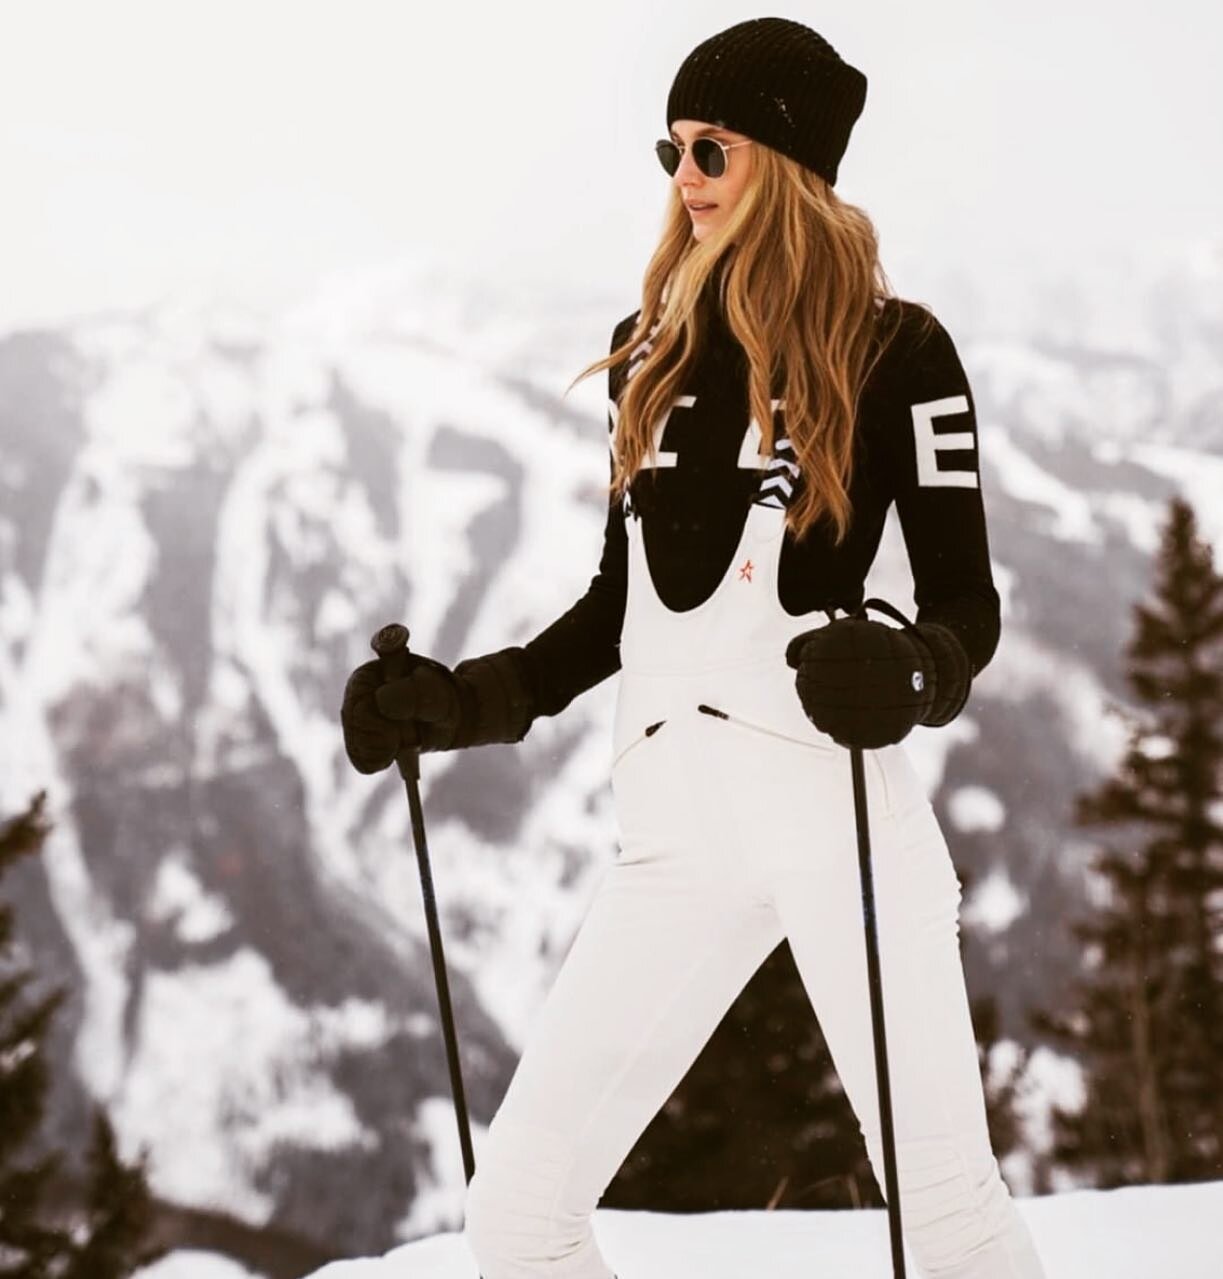 Do you want to look fabulous on the slopes? Call us, we can help you to pack the perfect outfits for your next ski trip! 🎿❄️ 
#stylebylz #personalstylist #packingsuitcaseforyou #perfectmoment #skioutfit #afterskioutfit